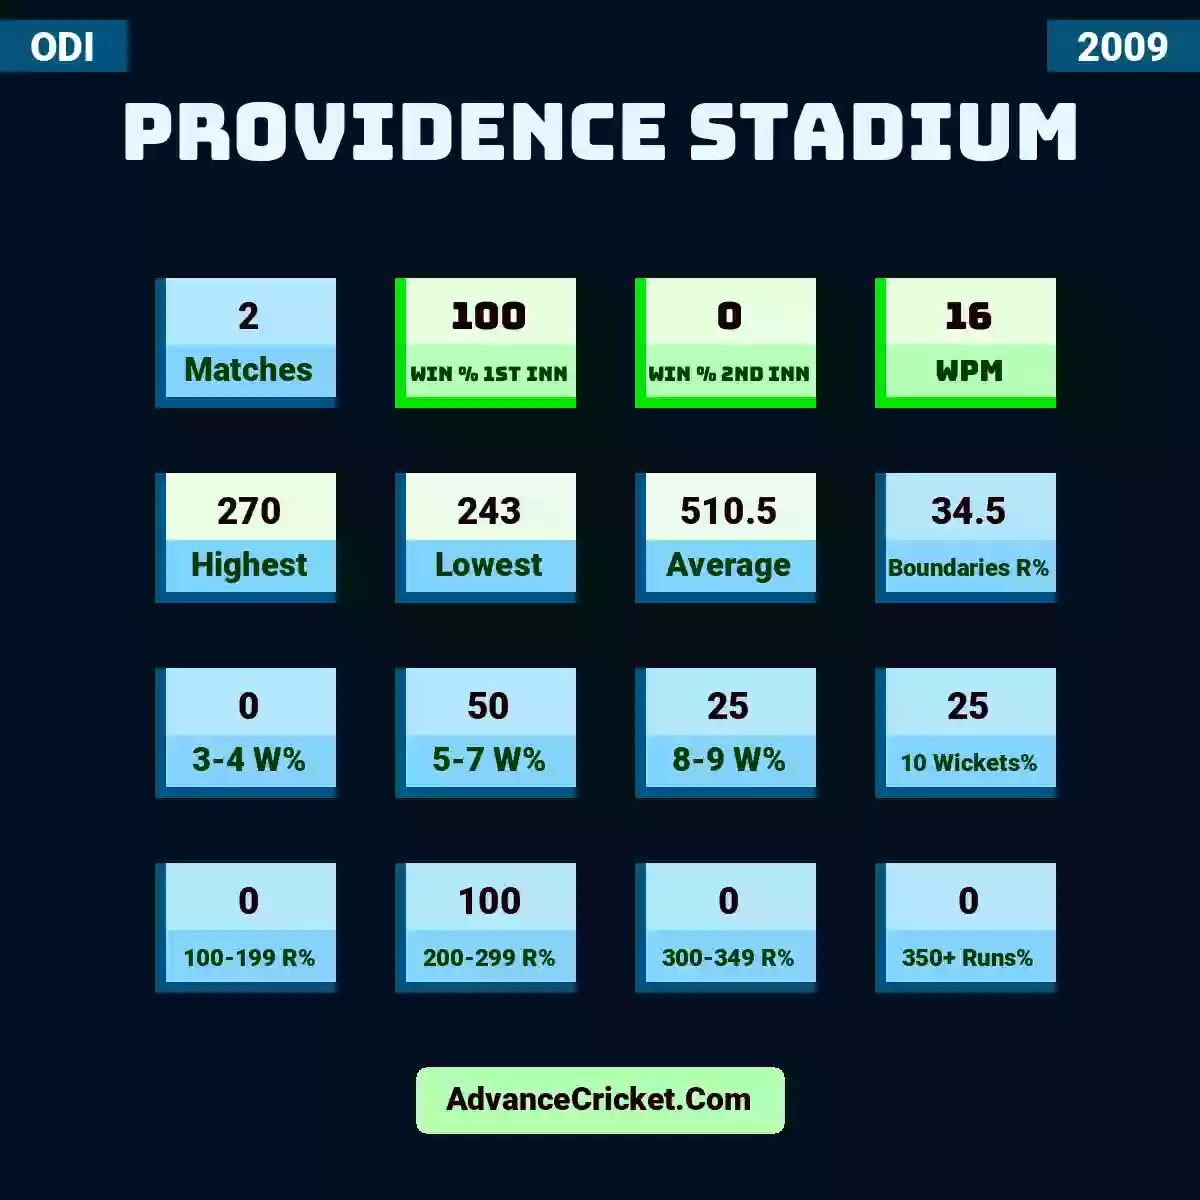 Image showing Providence Stadium with Matches: 2, Win % 1st Inn: 100, Win % 2nd Inn: 0, WPM: 16, Highest: 270, Lowest: 243, Average: 510.5, Boundaries R%: 34.5, 3-4 W%: 0, 5-7 W%: 50, 8-9 W%: 25, 10 Wickets%: 25, 100-199 R%: 0, 200-299 R%: 100, 300-349 R%: 0, 350+ Runs%: 0.